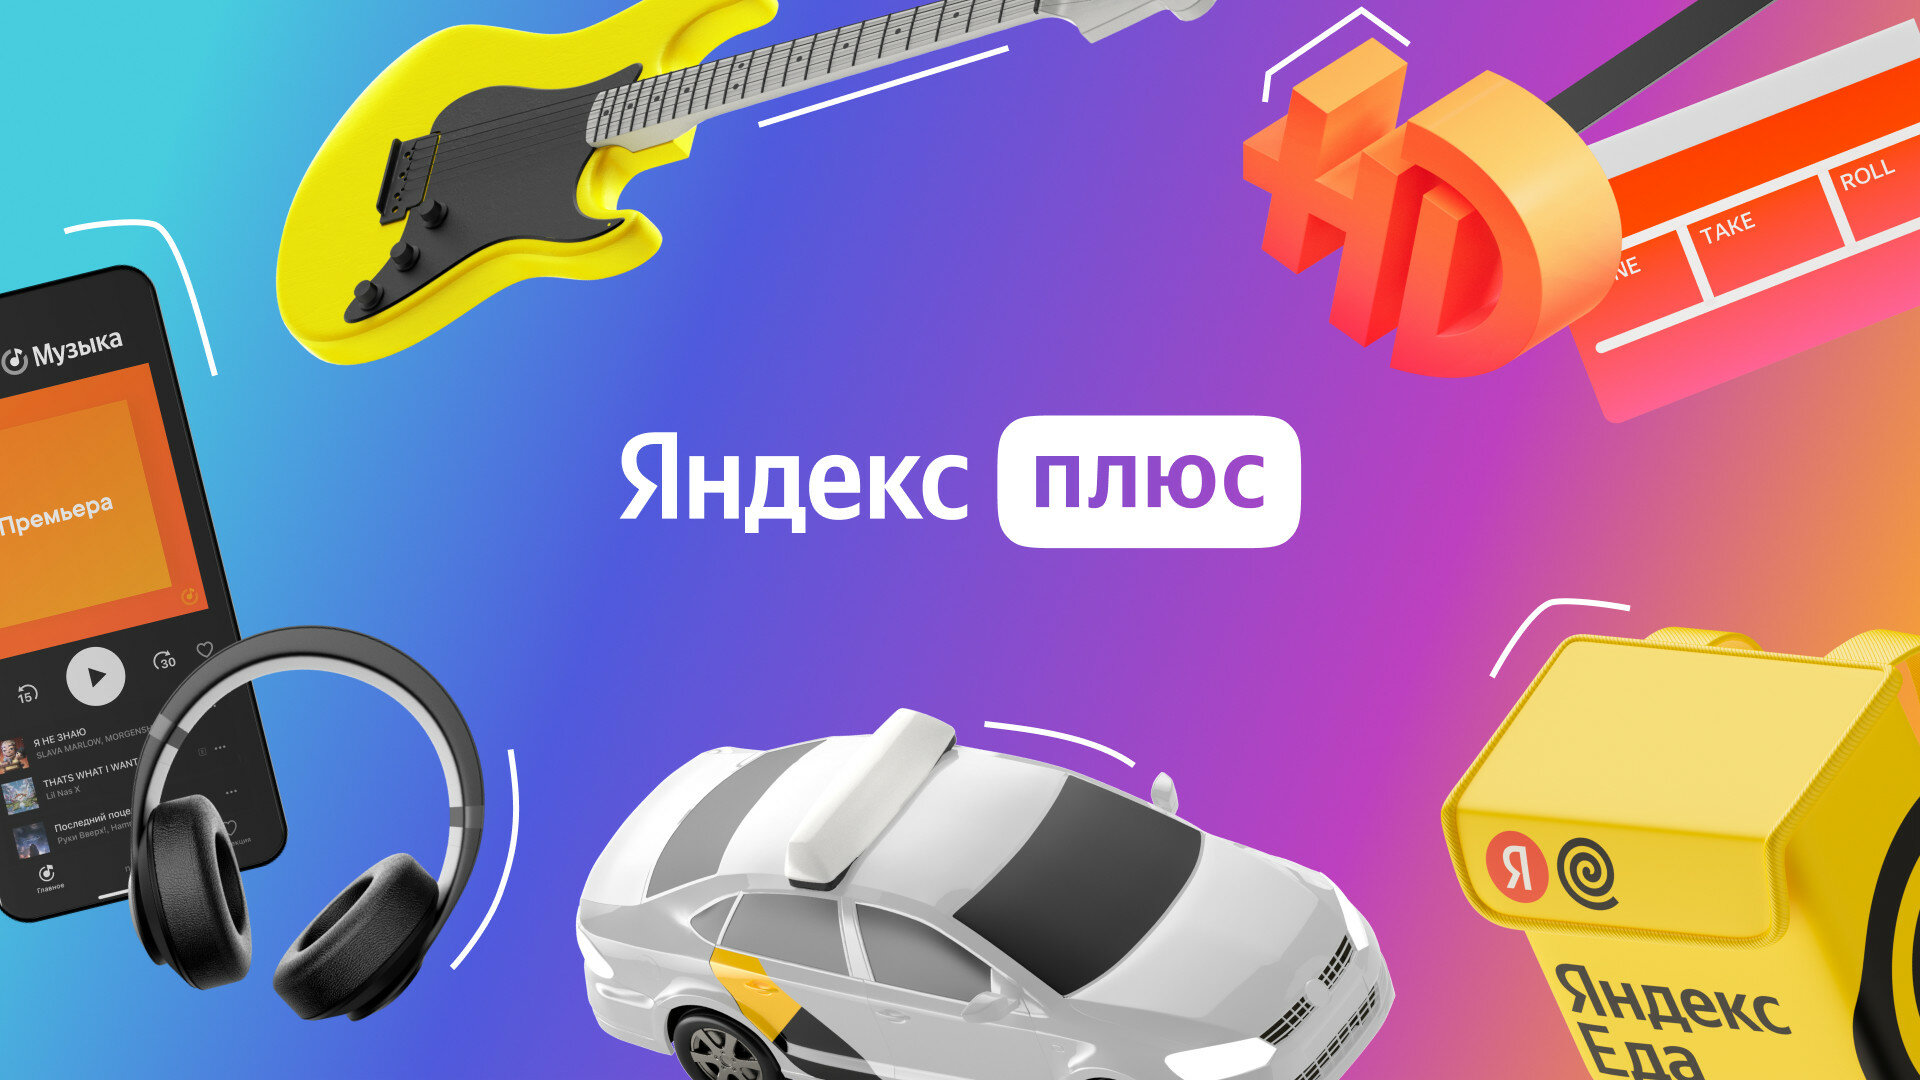 Yandex gives an annual subscription to Plus for a high score on the Unified State Examination